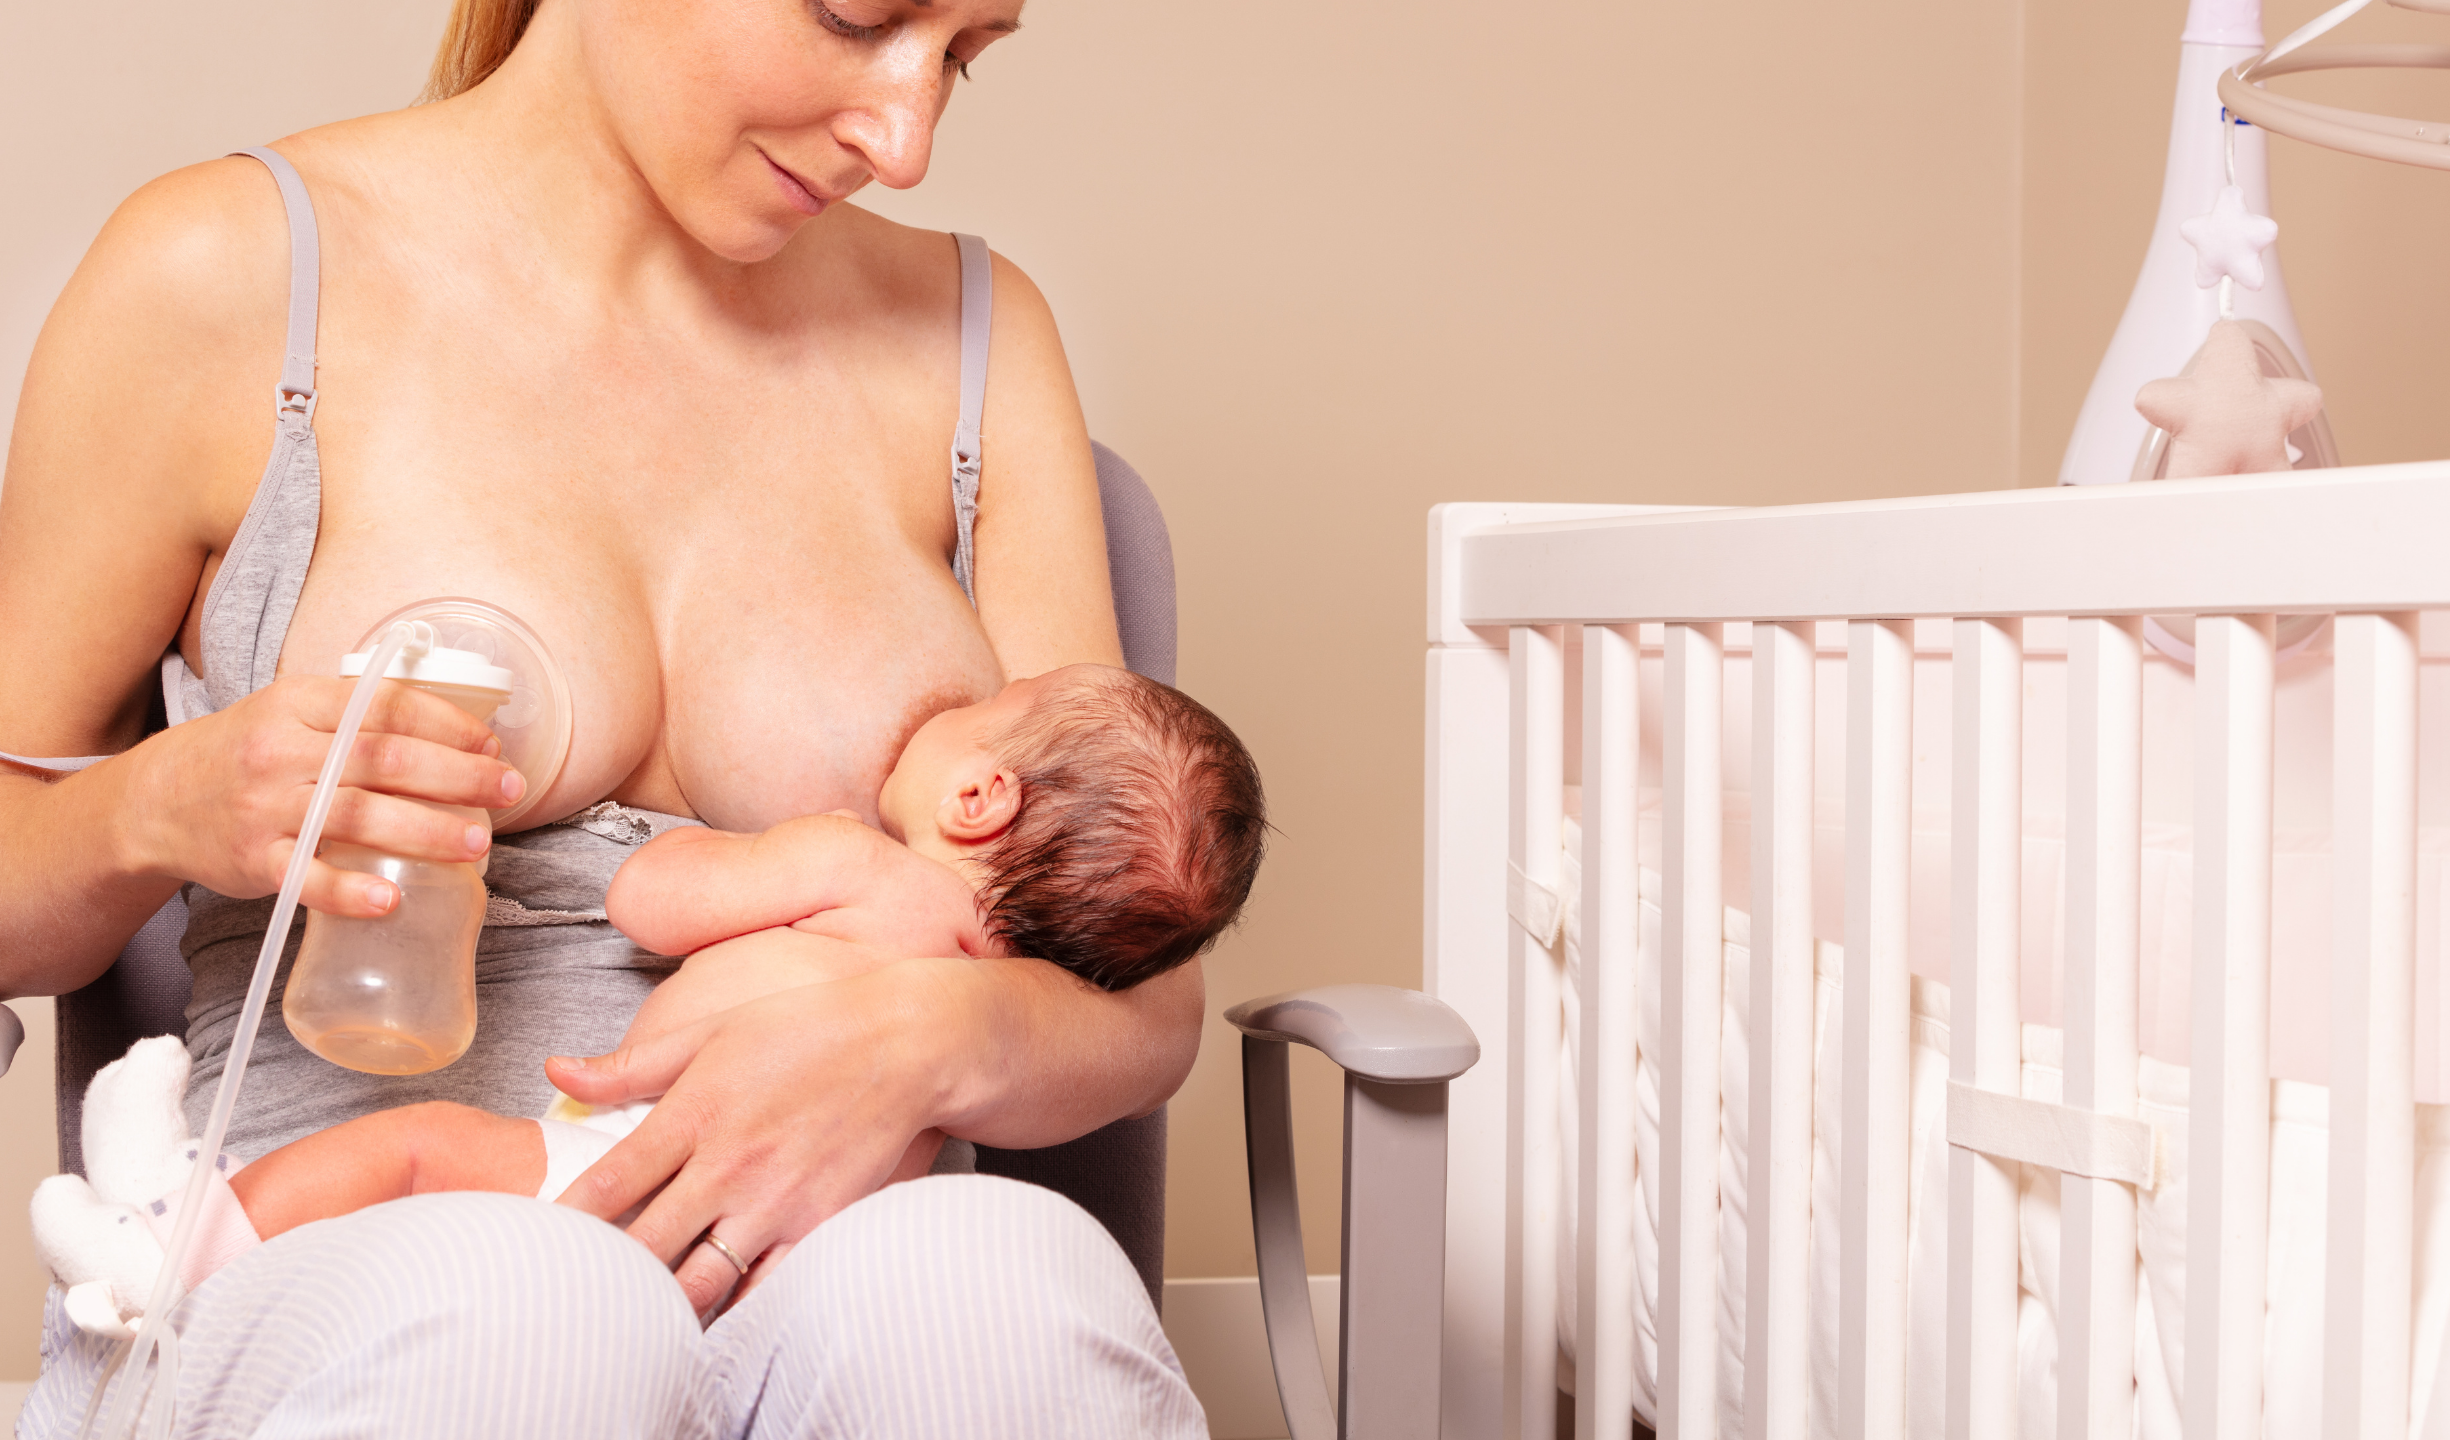 Treatment Guide for Cracked or Chapped Nipple During Breastfeeding